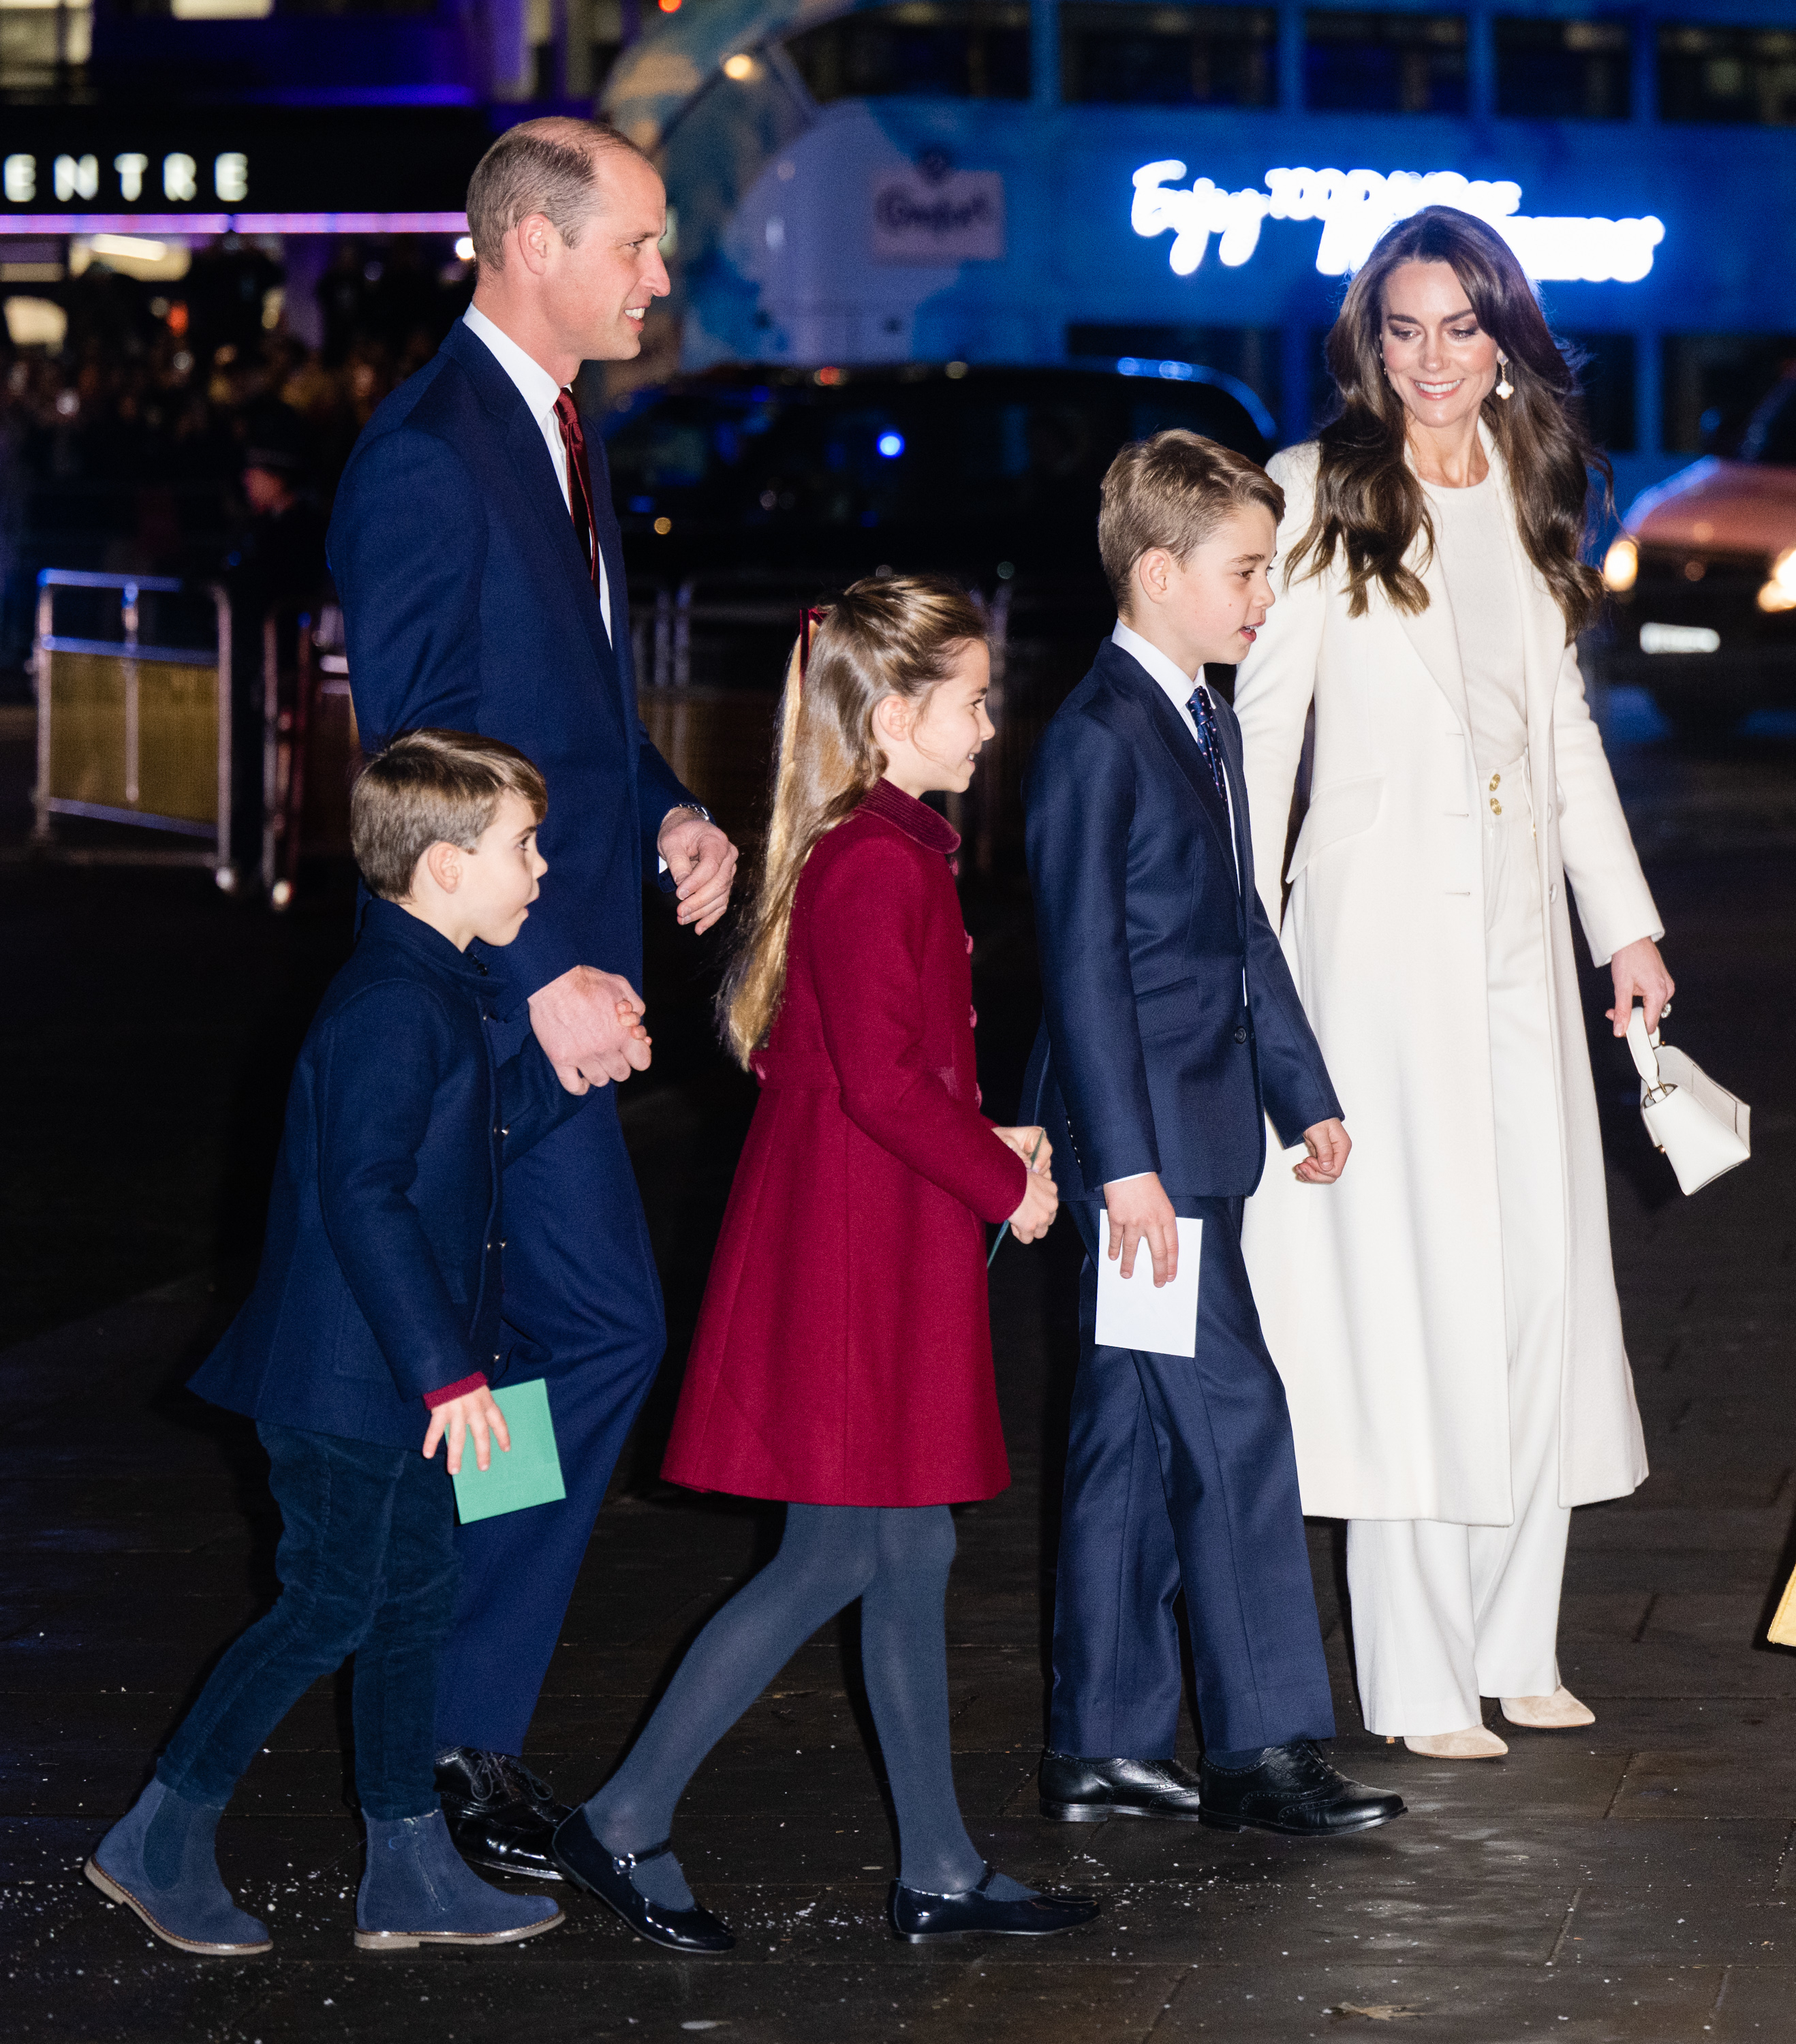 Prince William and Kate Middleton with their children walking outside at night for an event